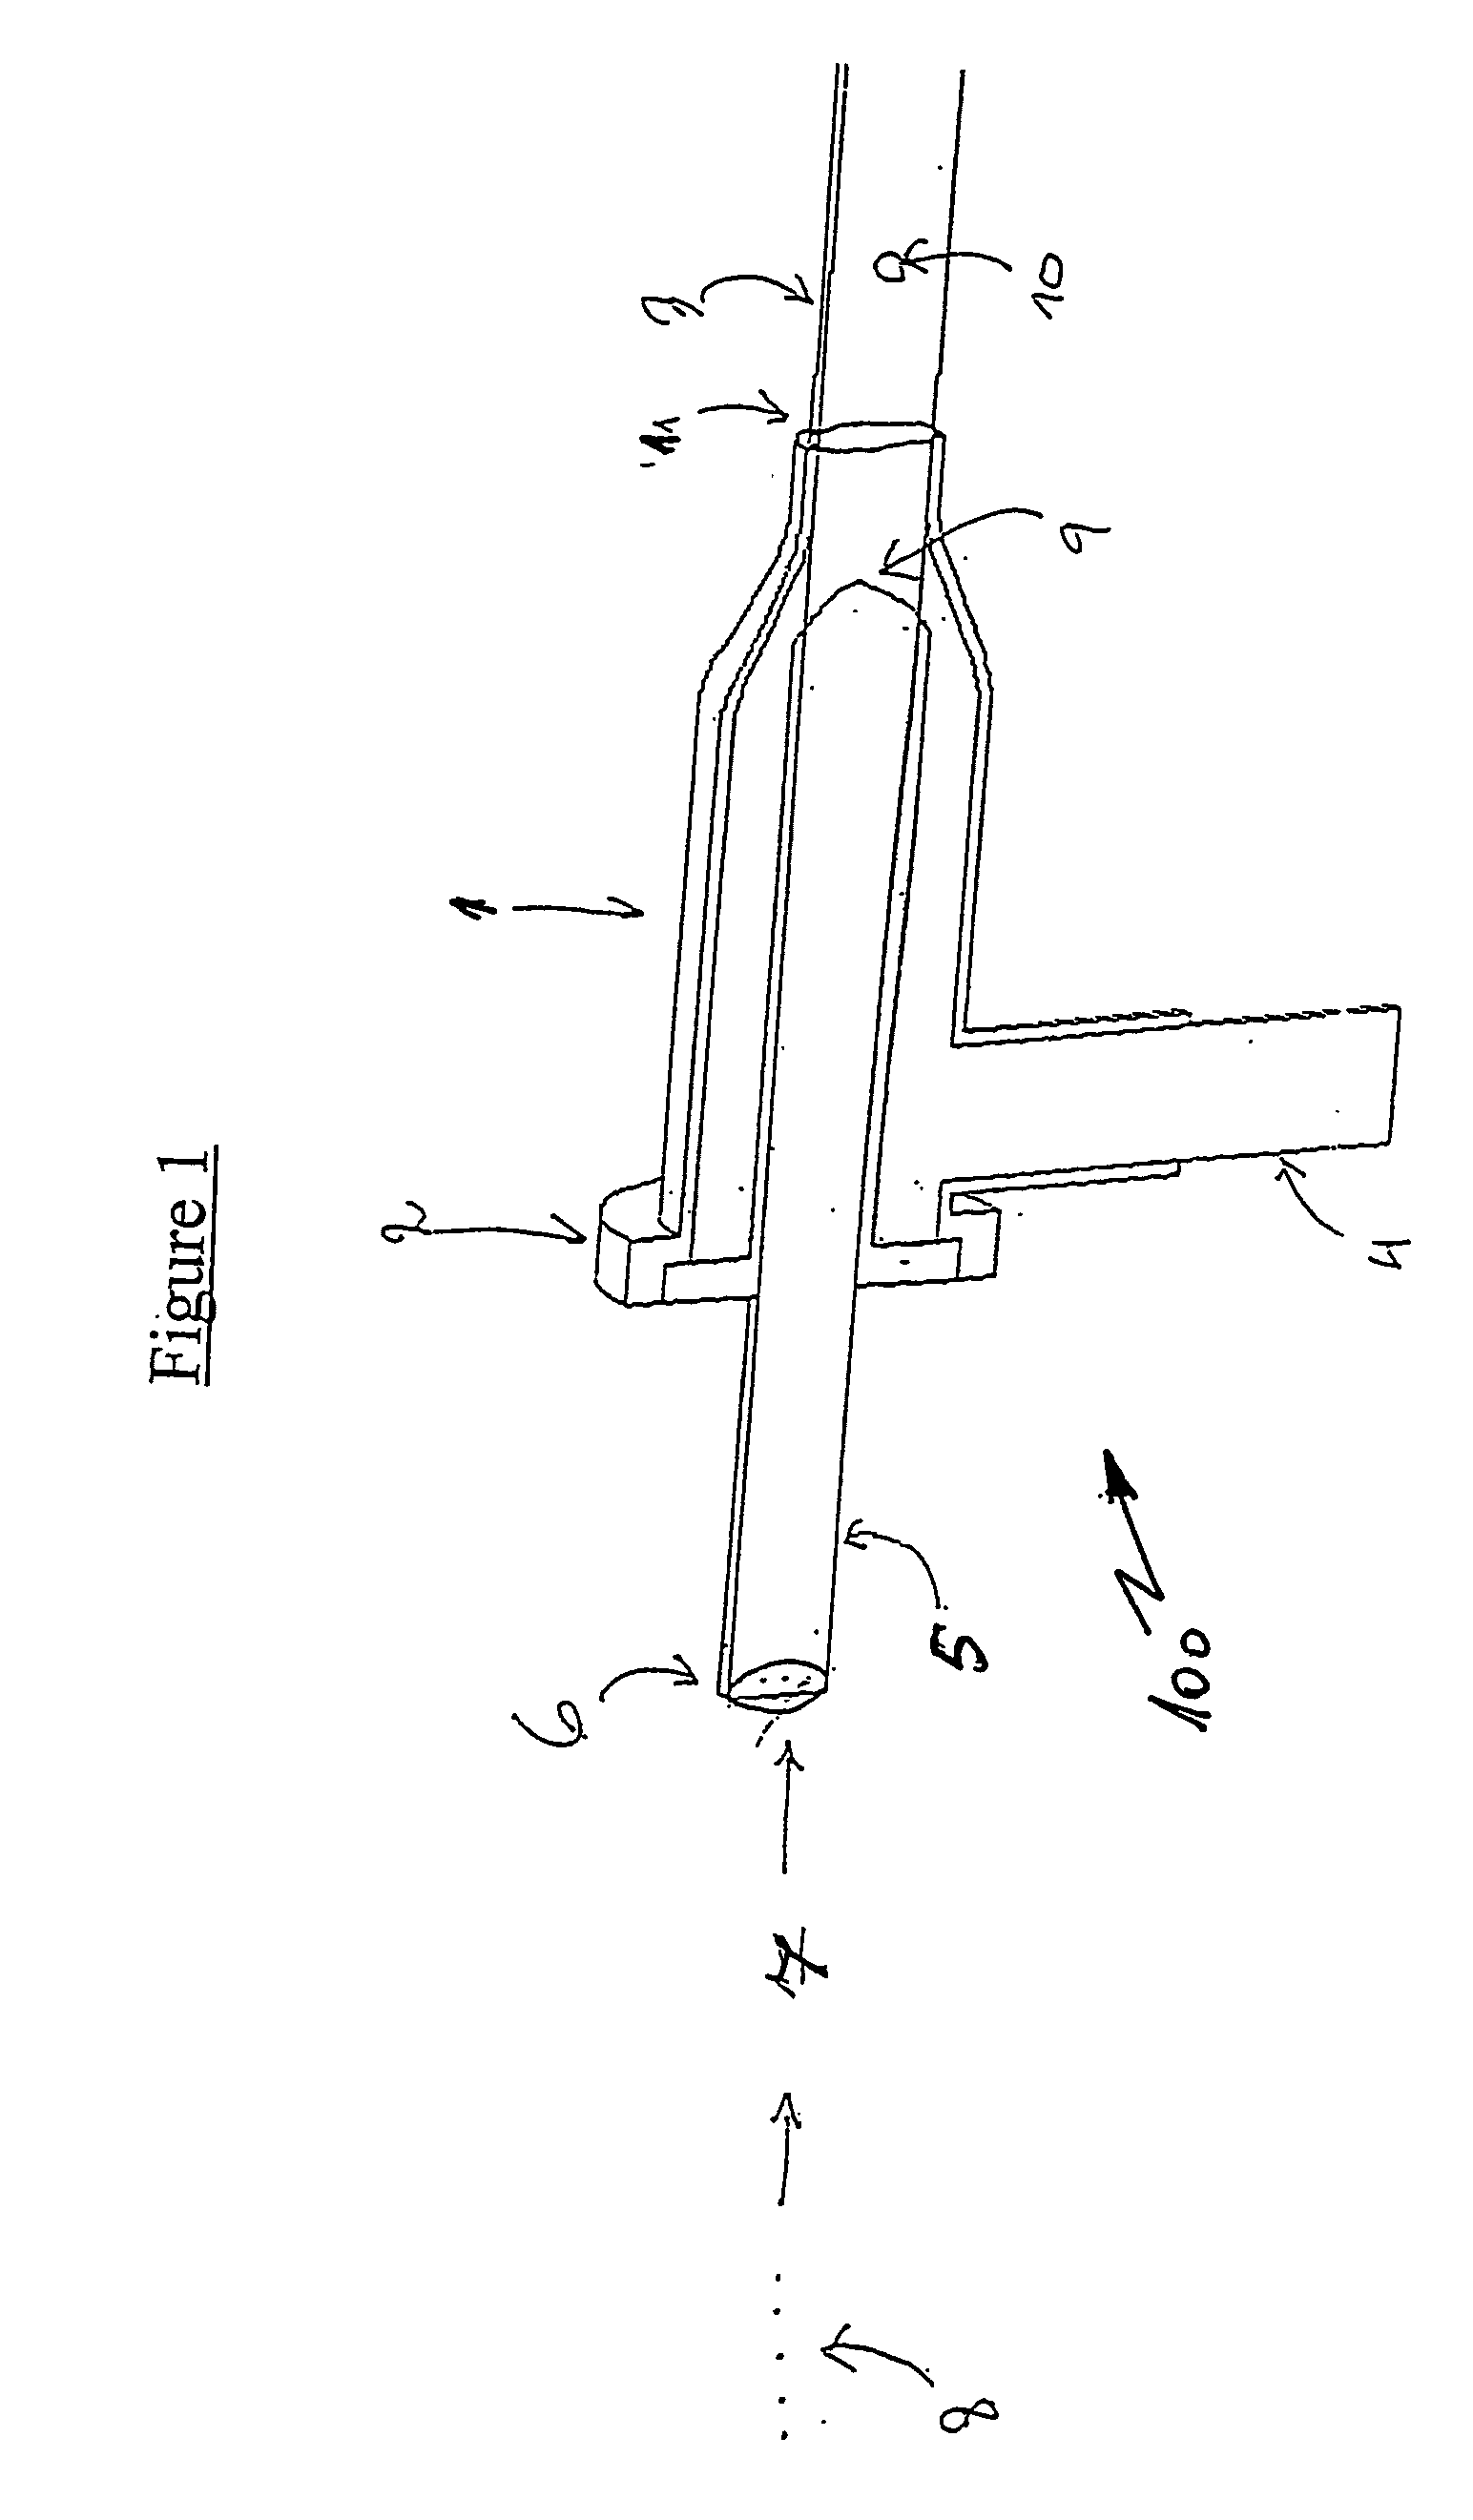 Method and device for affecting a chemical or mechanical property of a target site